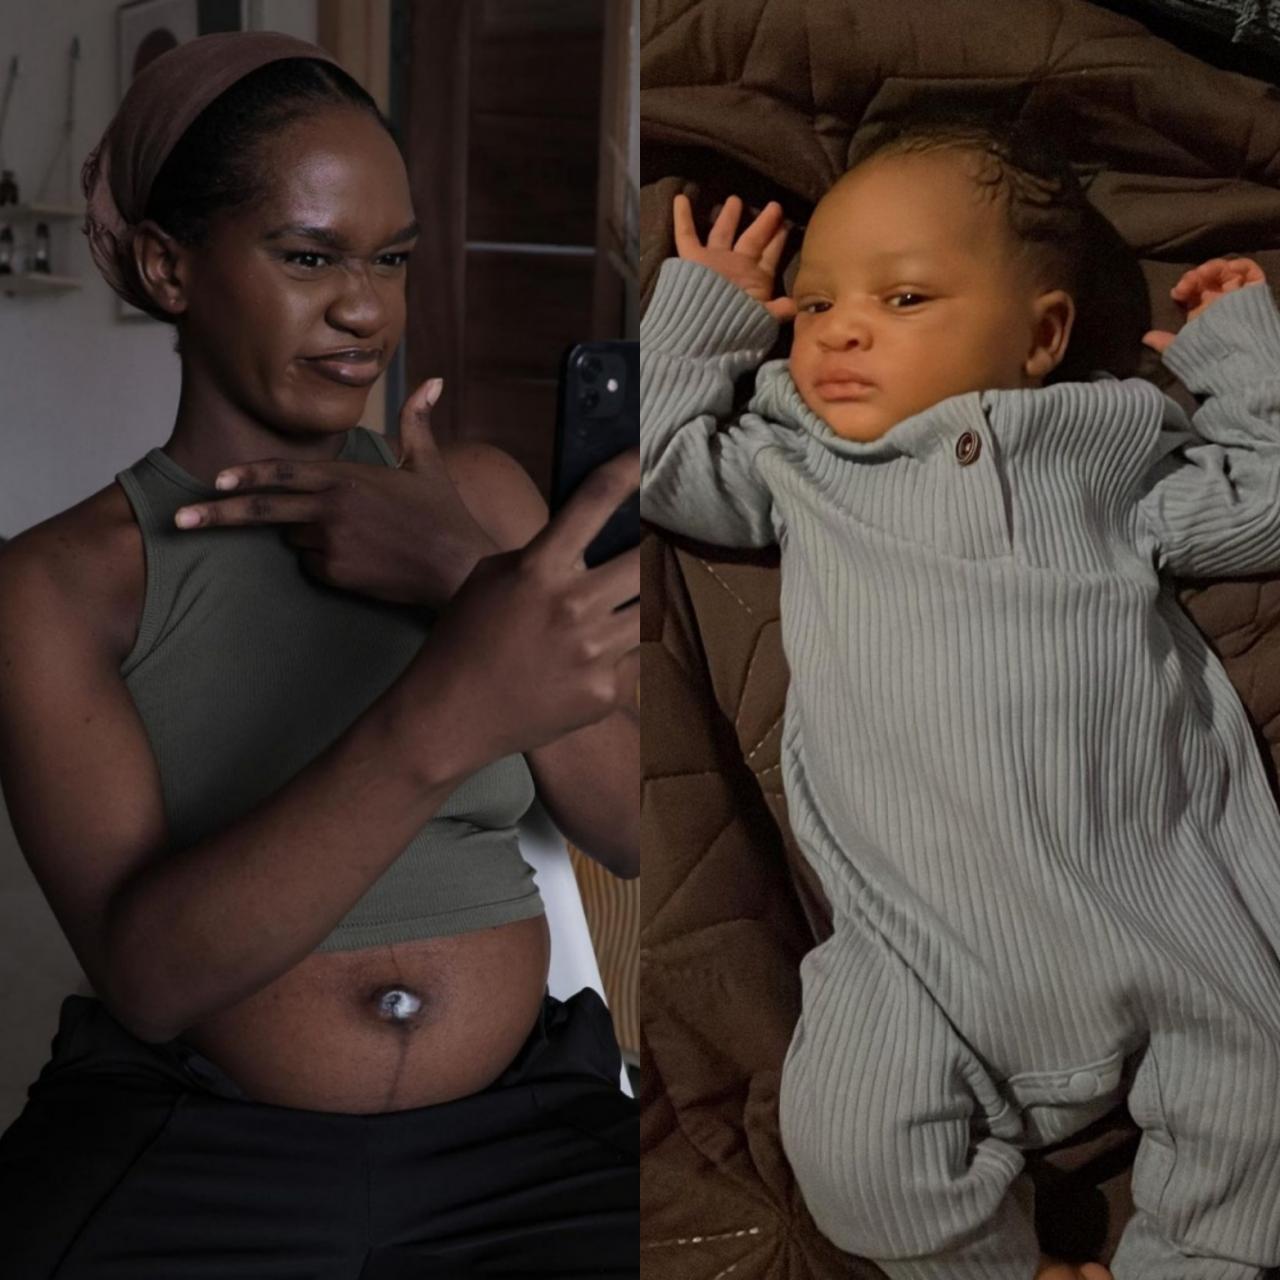 Maraji shows off her newborn son one week after his birth